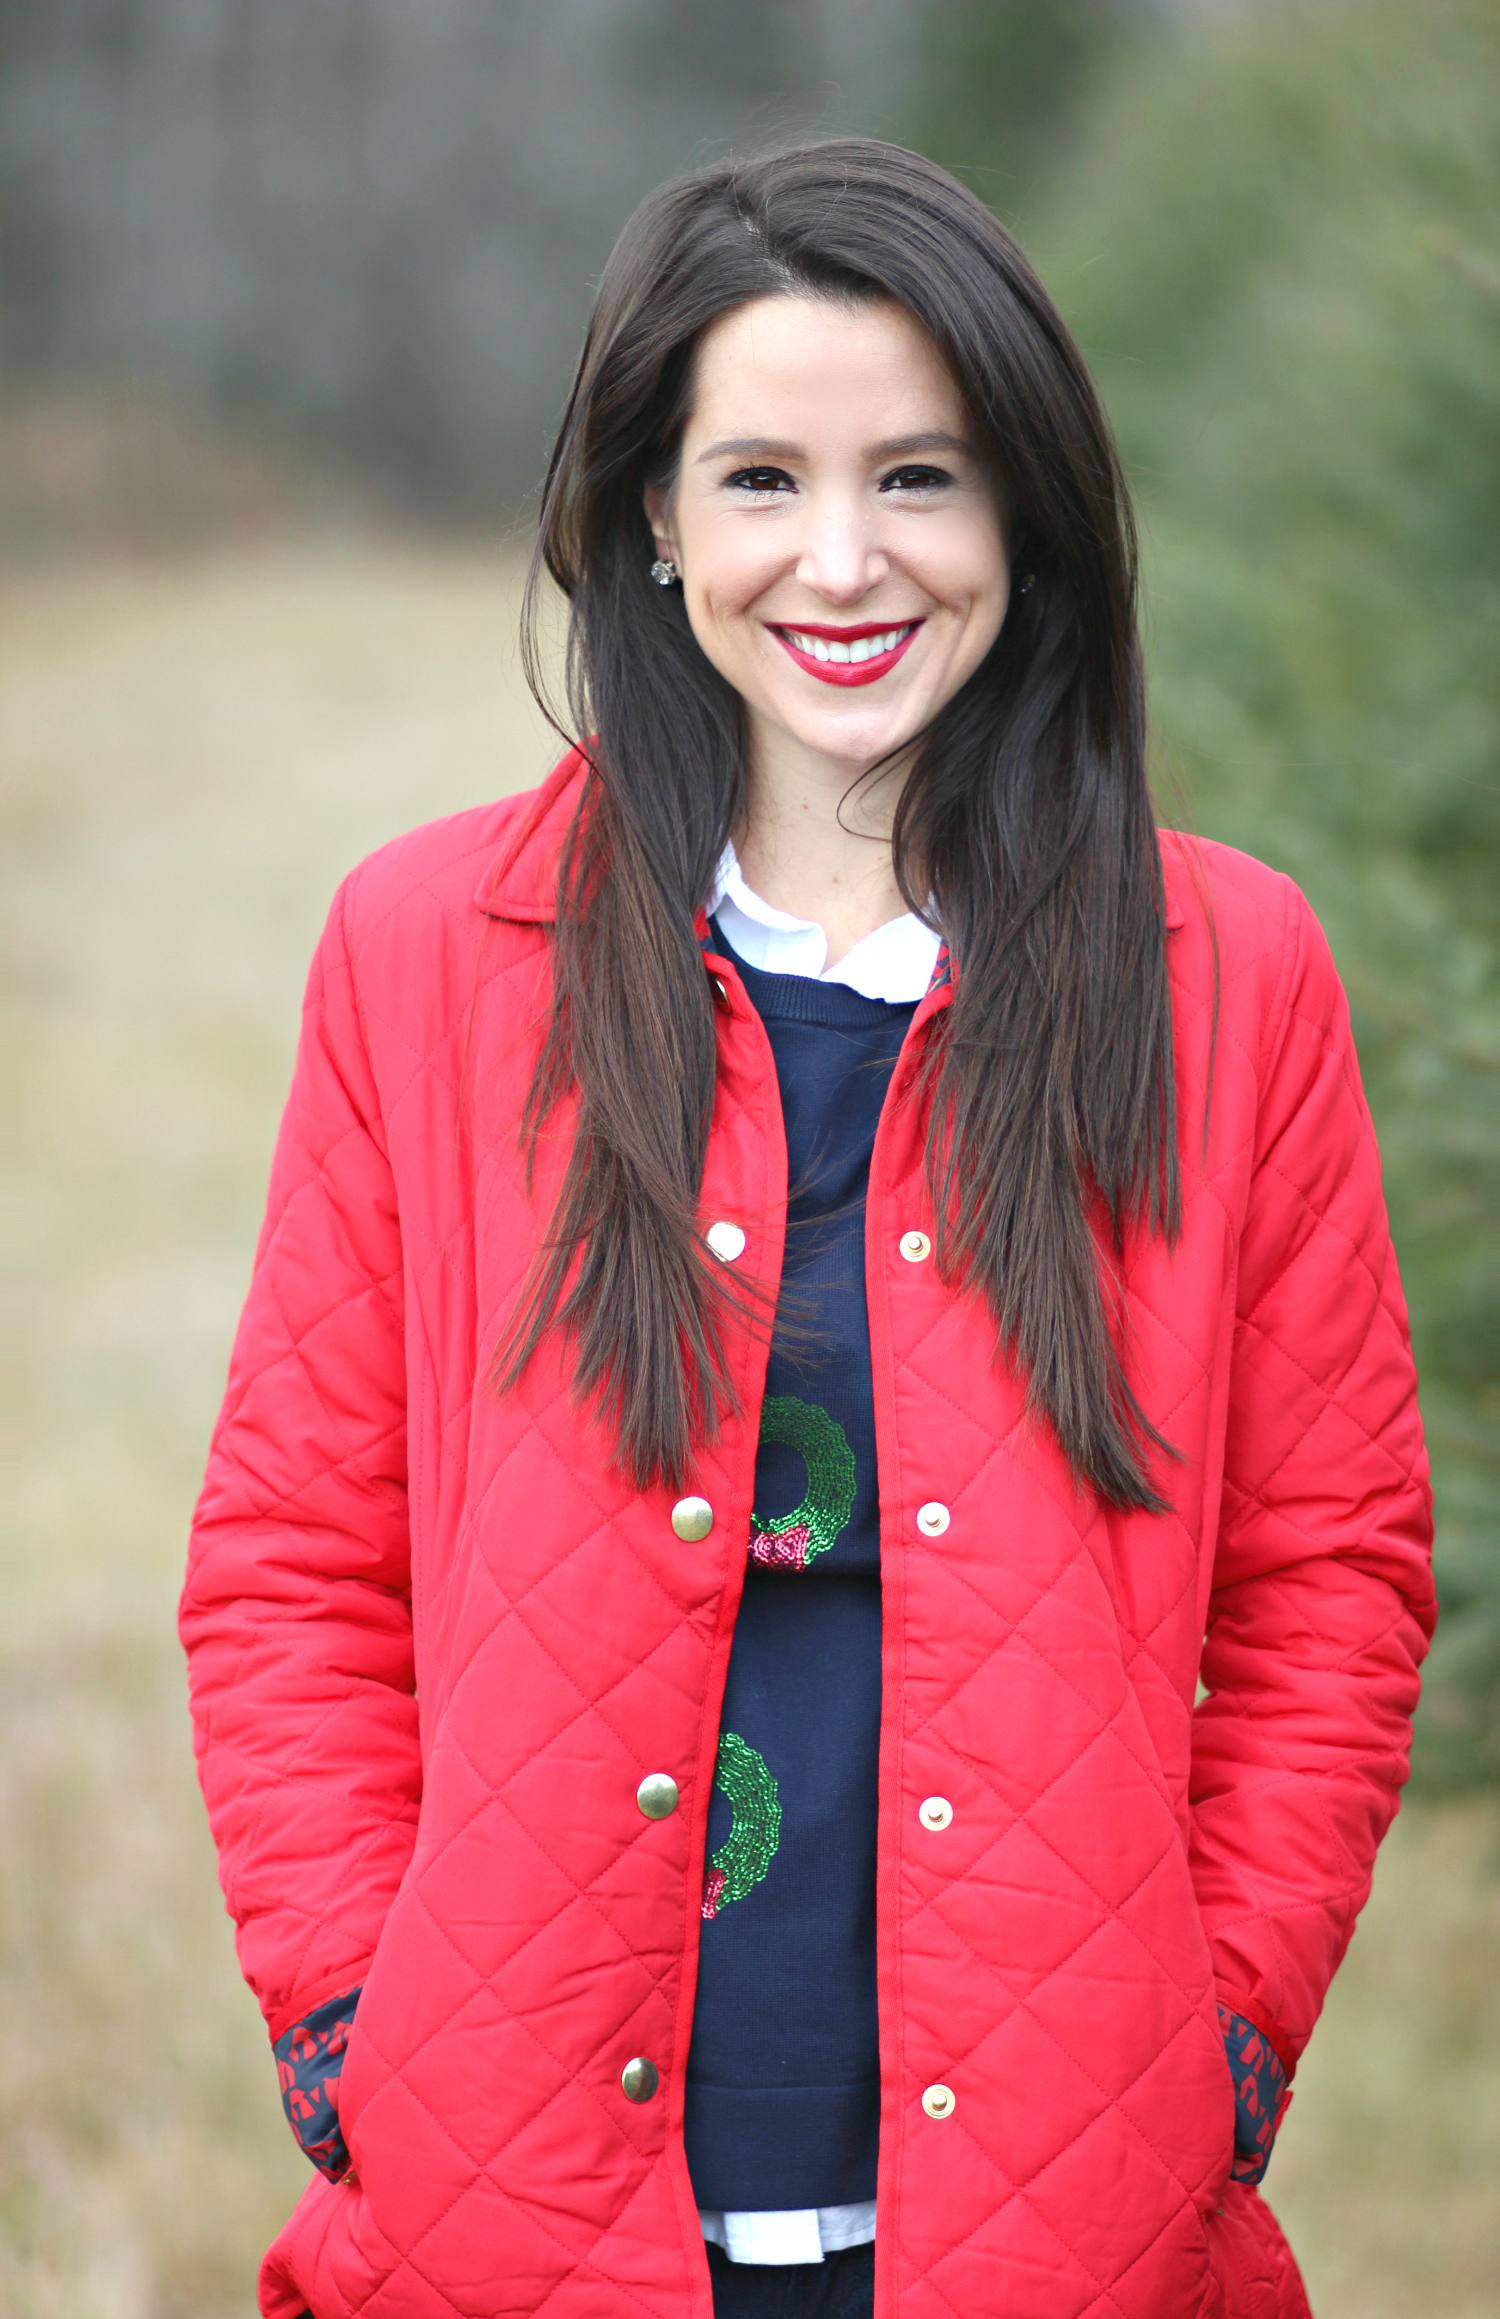 Cutting down our Christmas tree in the perfect affordable quilted red jacket from Crown & Ivory